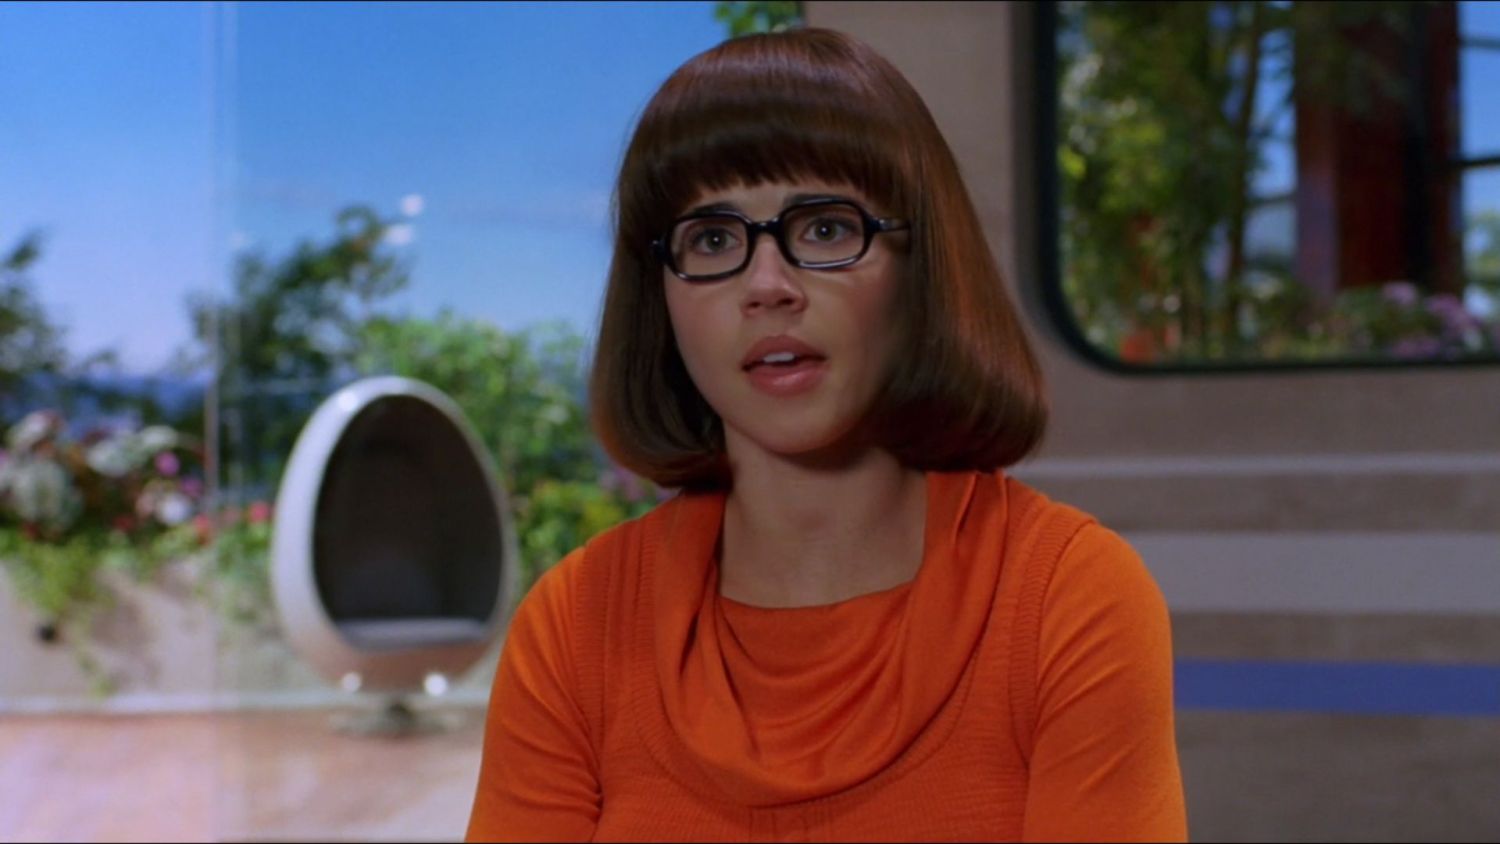 Scooby-Doo' Halloween movie finally depicts Velma as queer